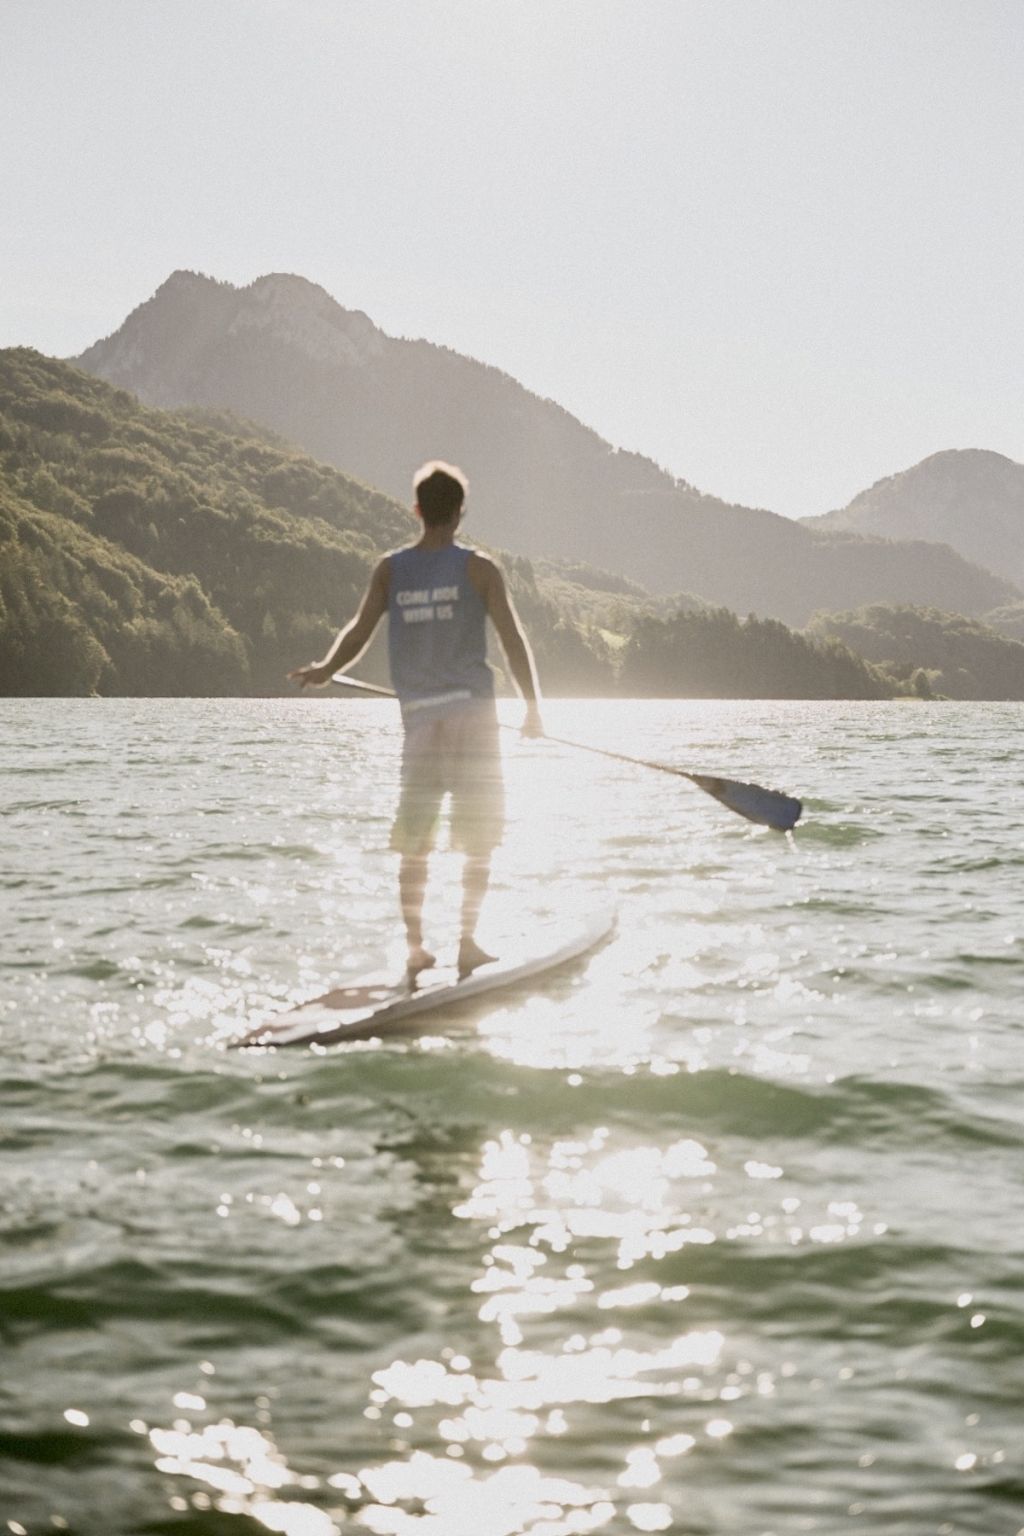 &quot;It’s just the perfect lake for nice SUP tours.&quot;